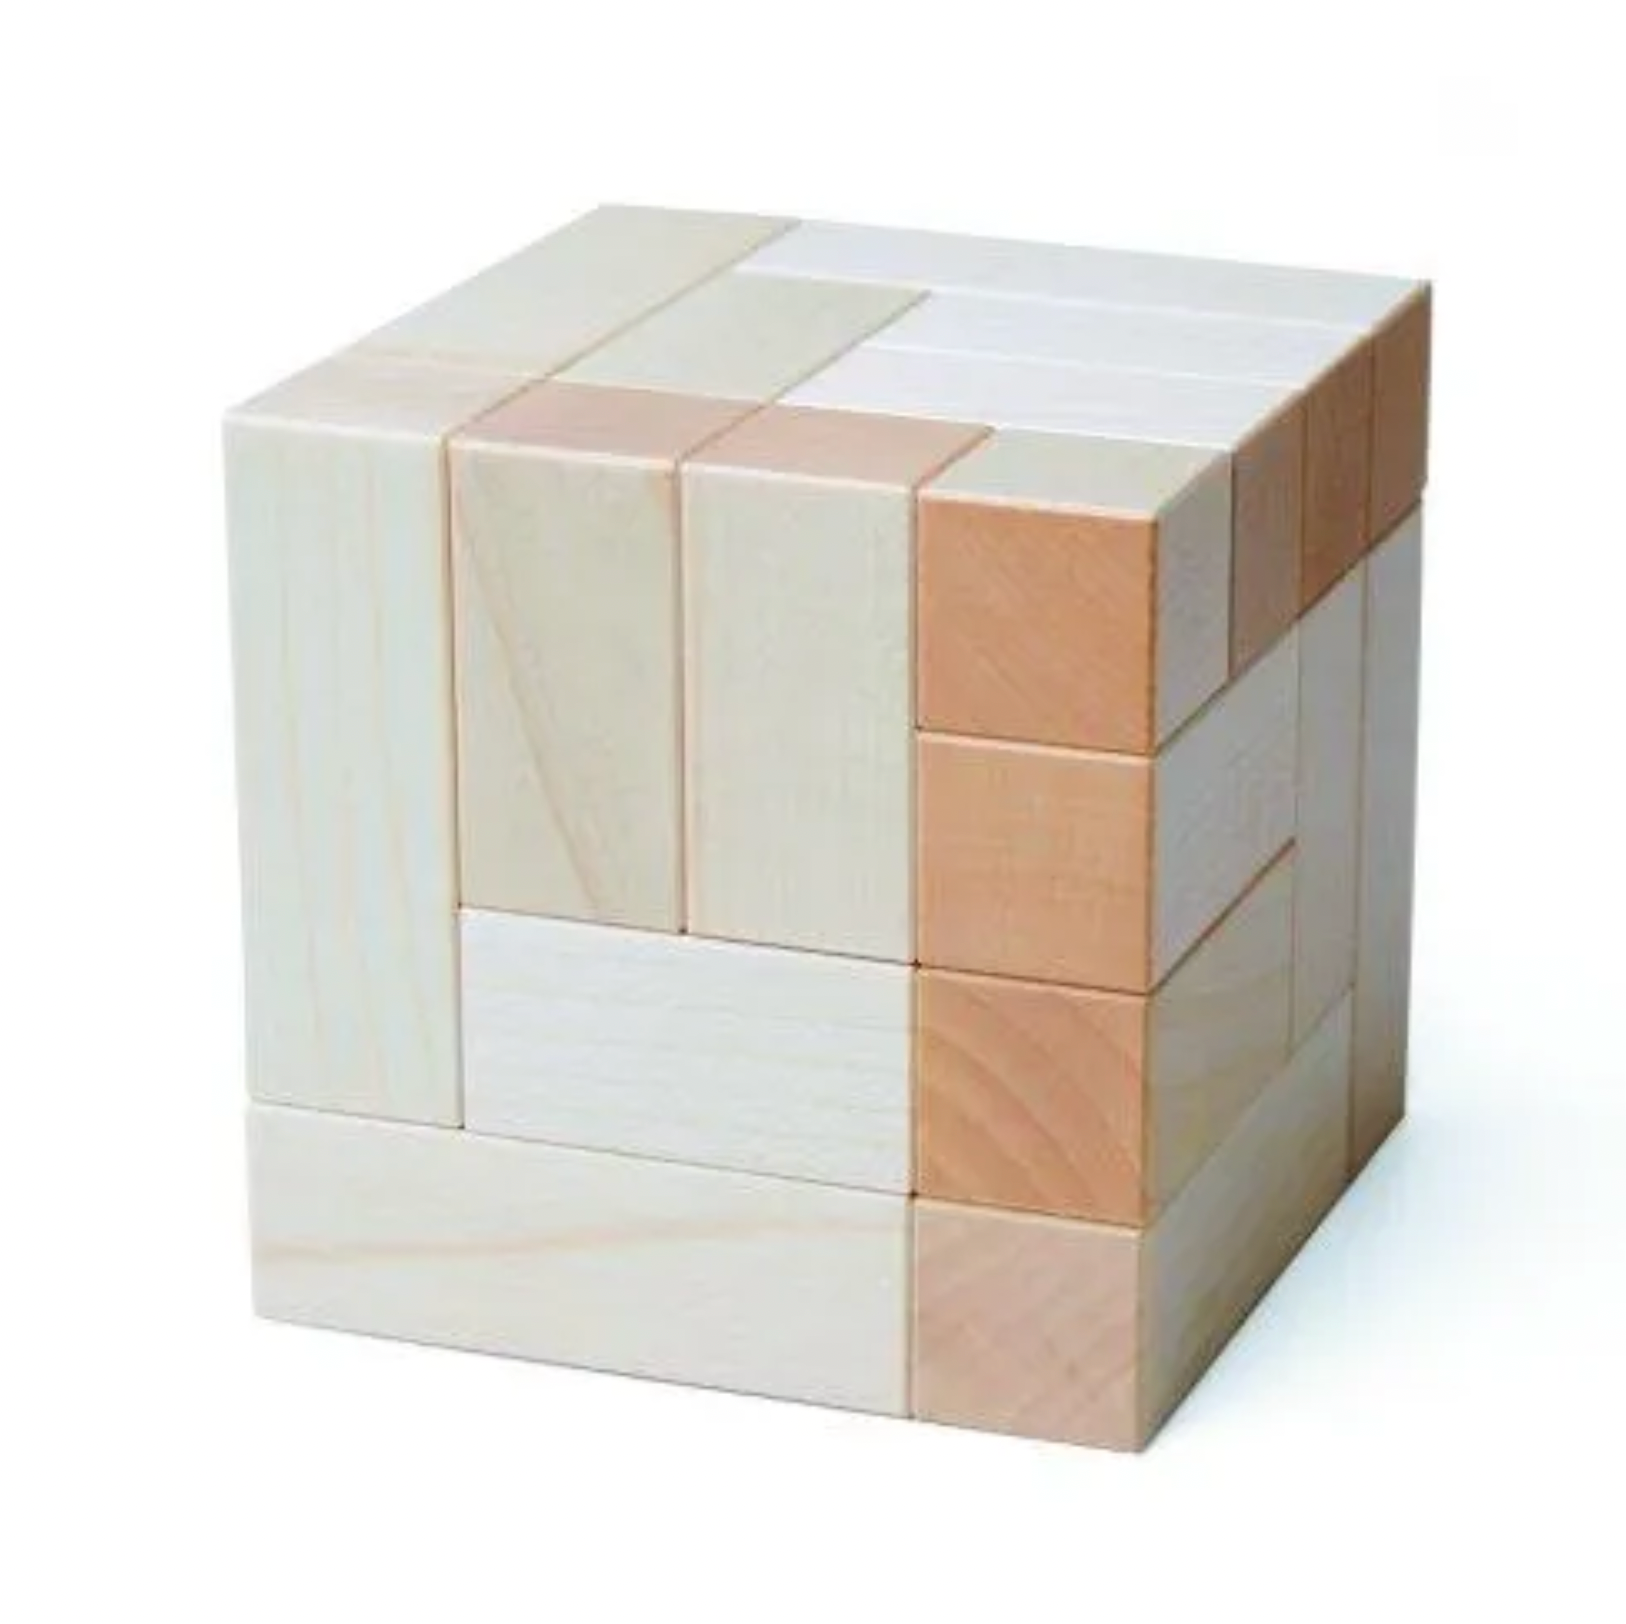 Naef Naef Cubicus Puzzles